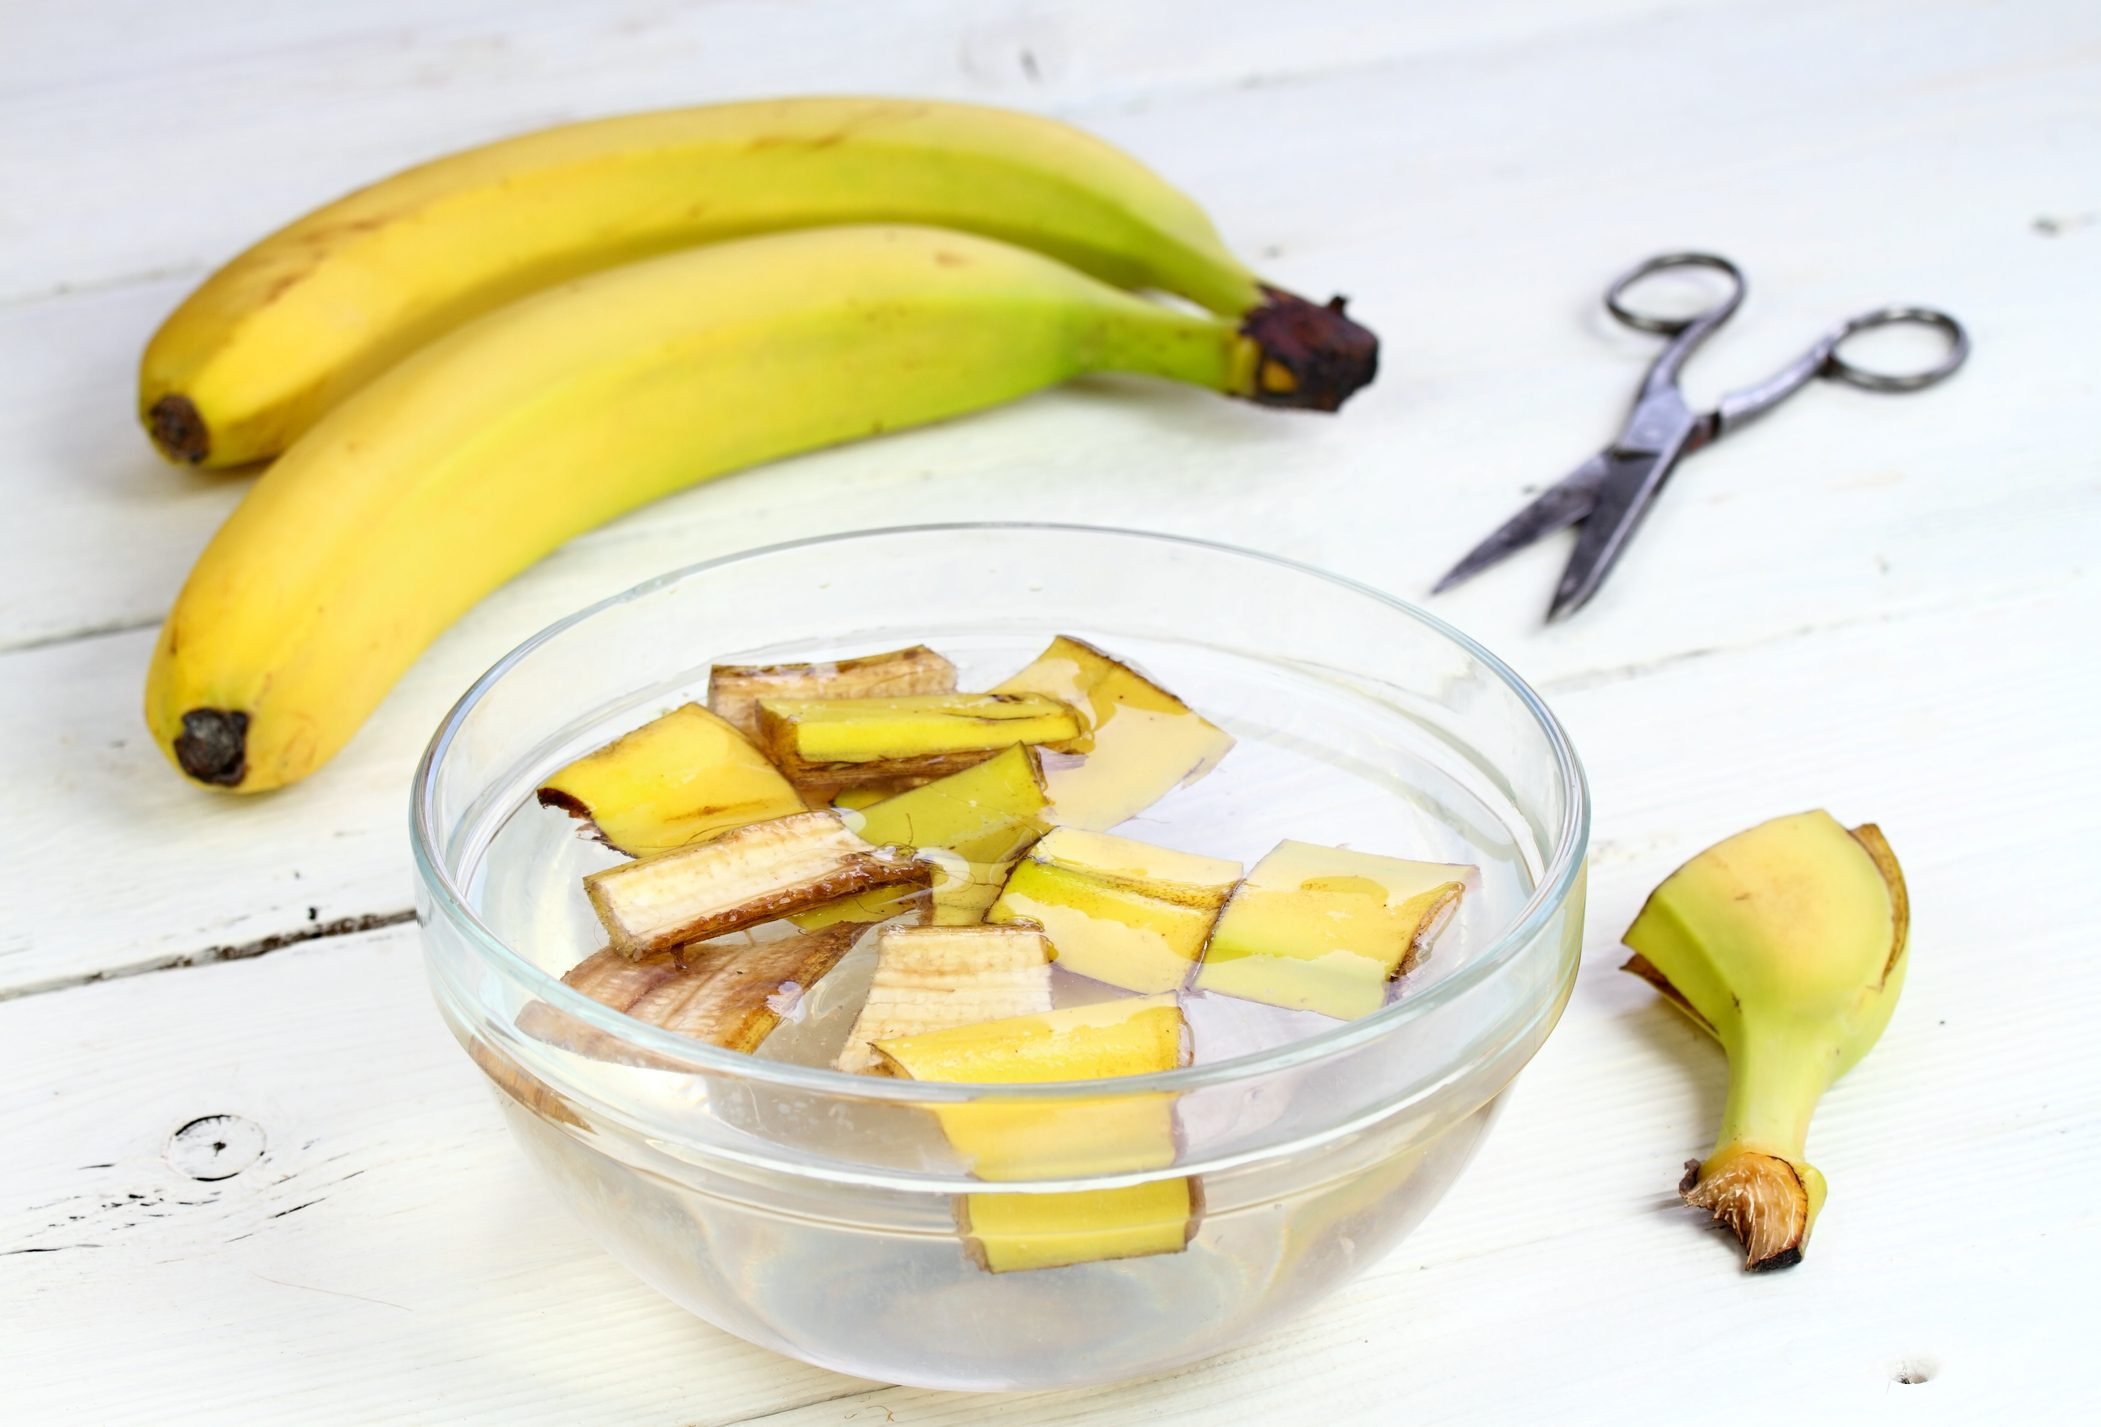 Should You Water Your Plants with a Banana Peel?